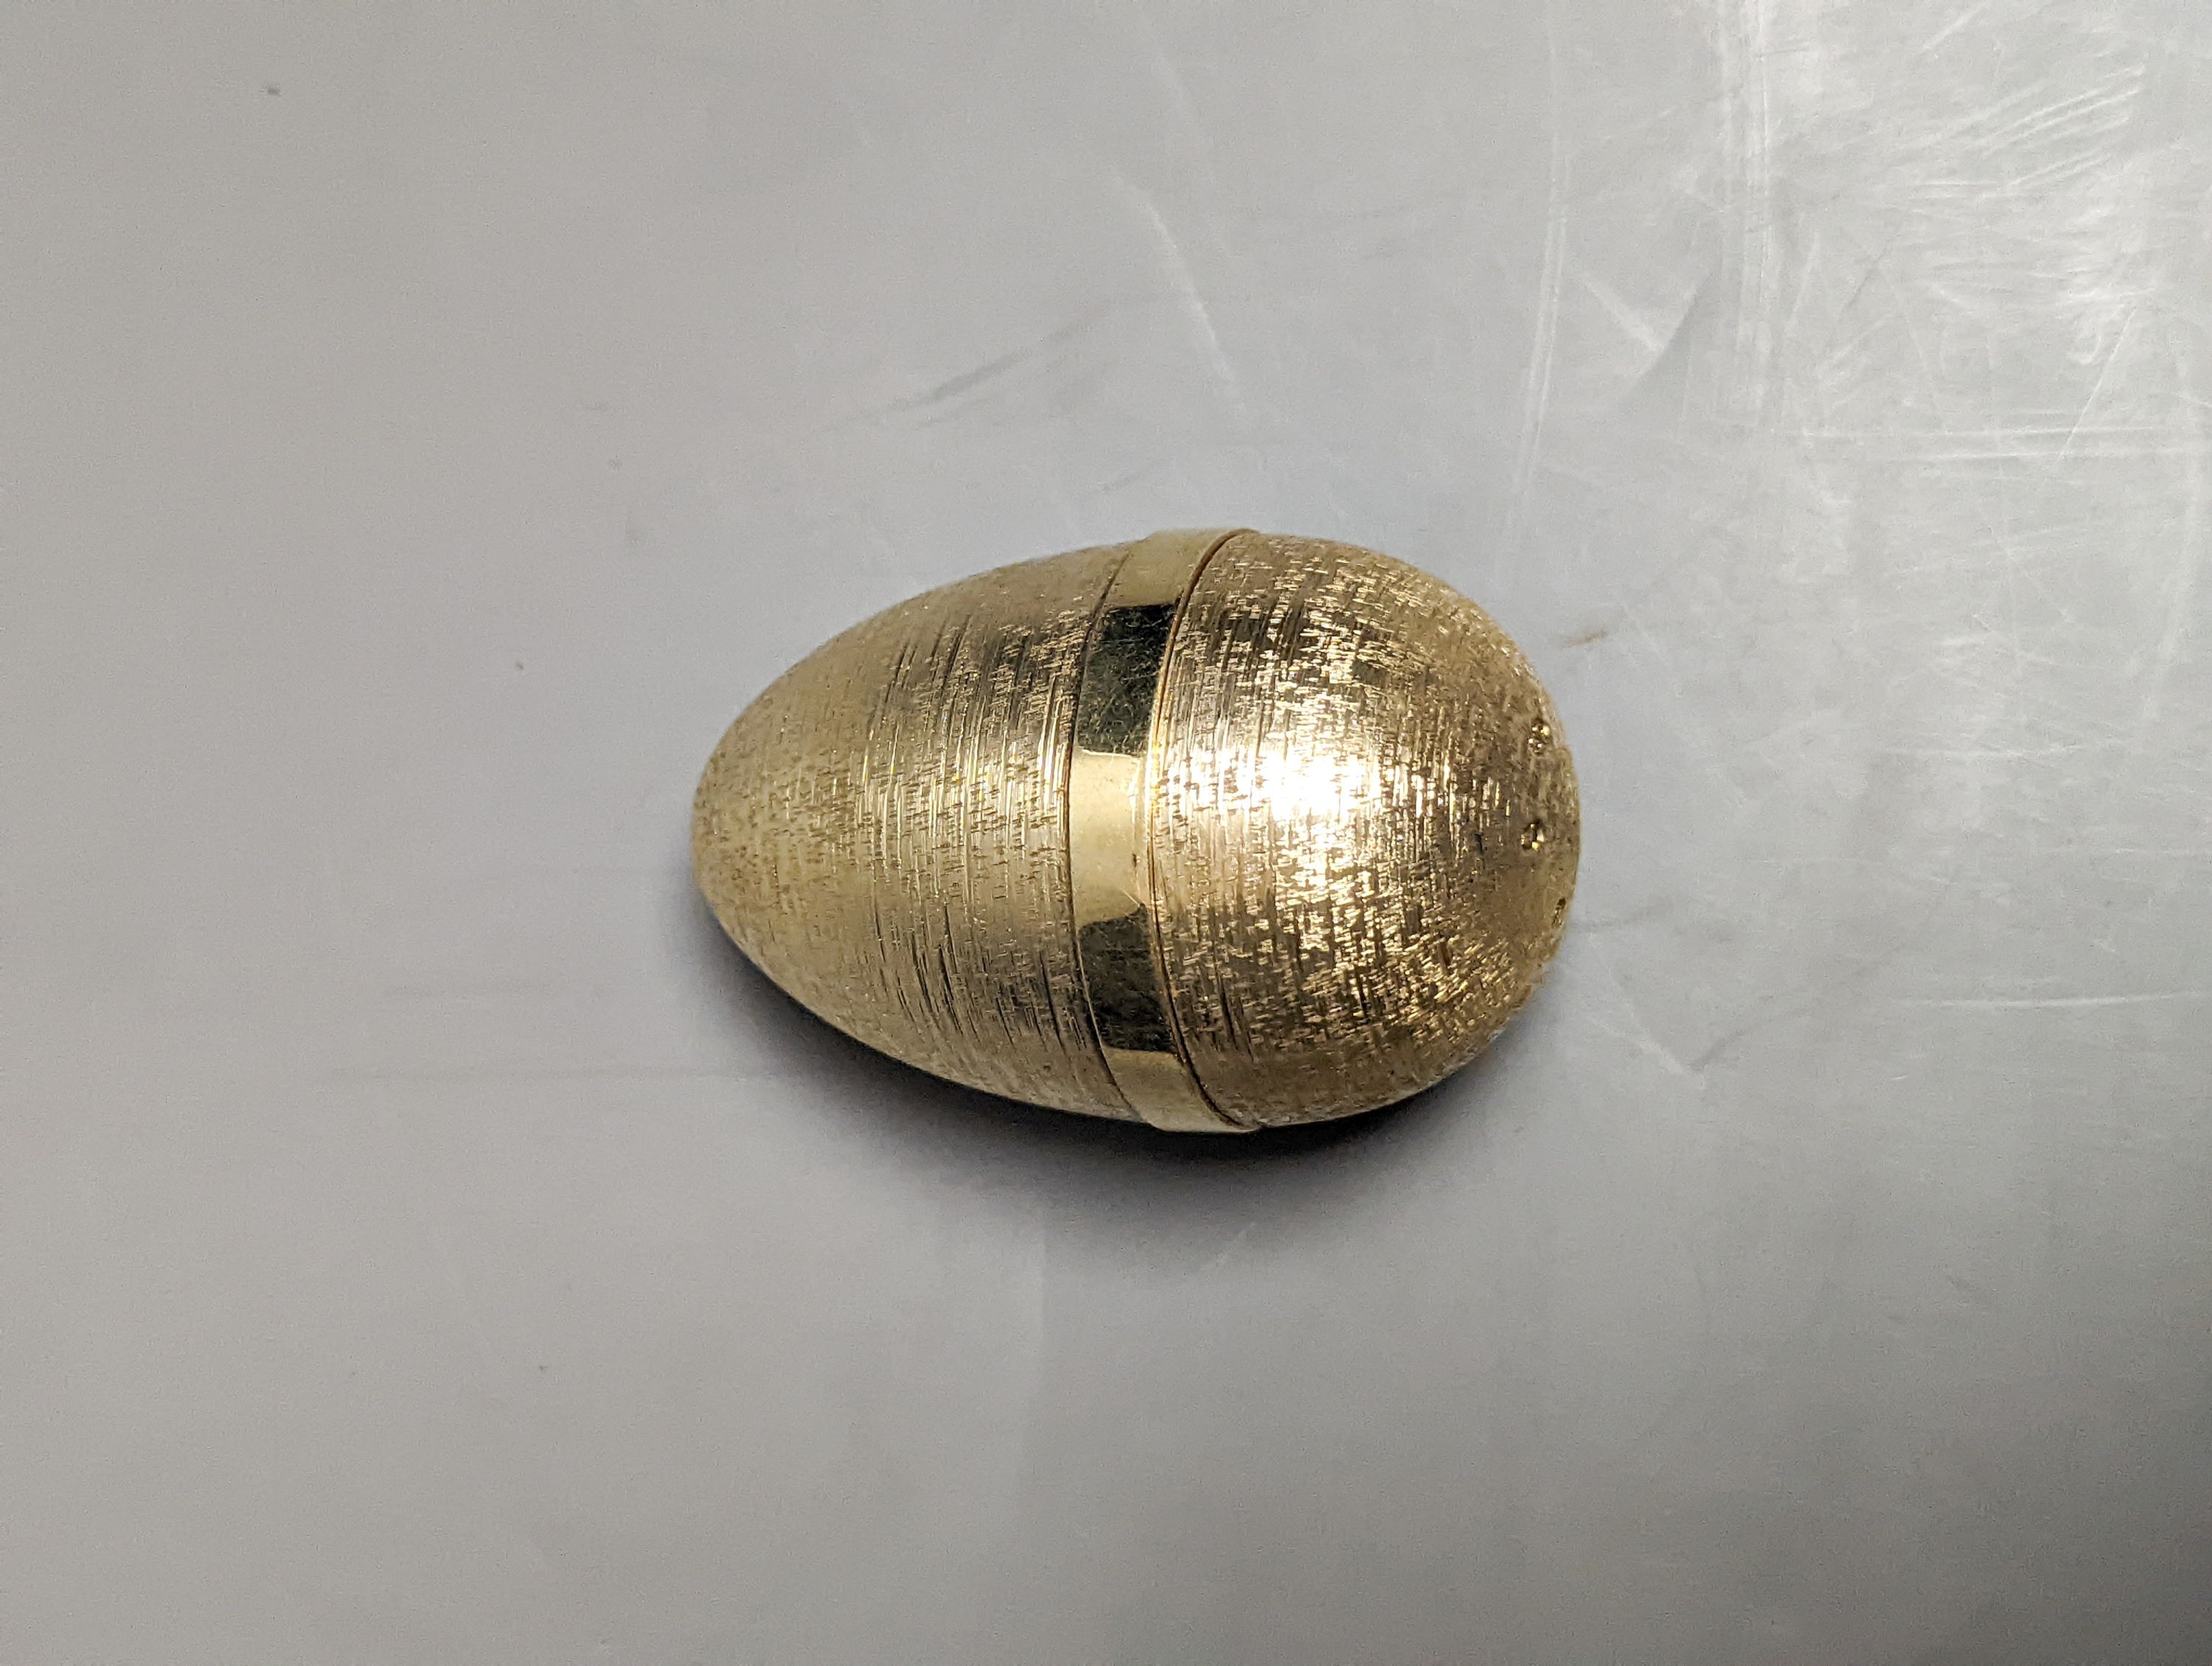 A 1970's textured silver gilt surprise egg by Stuart Devlin, opening to reveal a ship's anchor with fish, London, 1977, 71mm, no box or certificate.